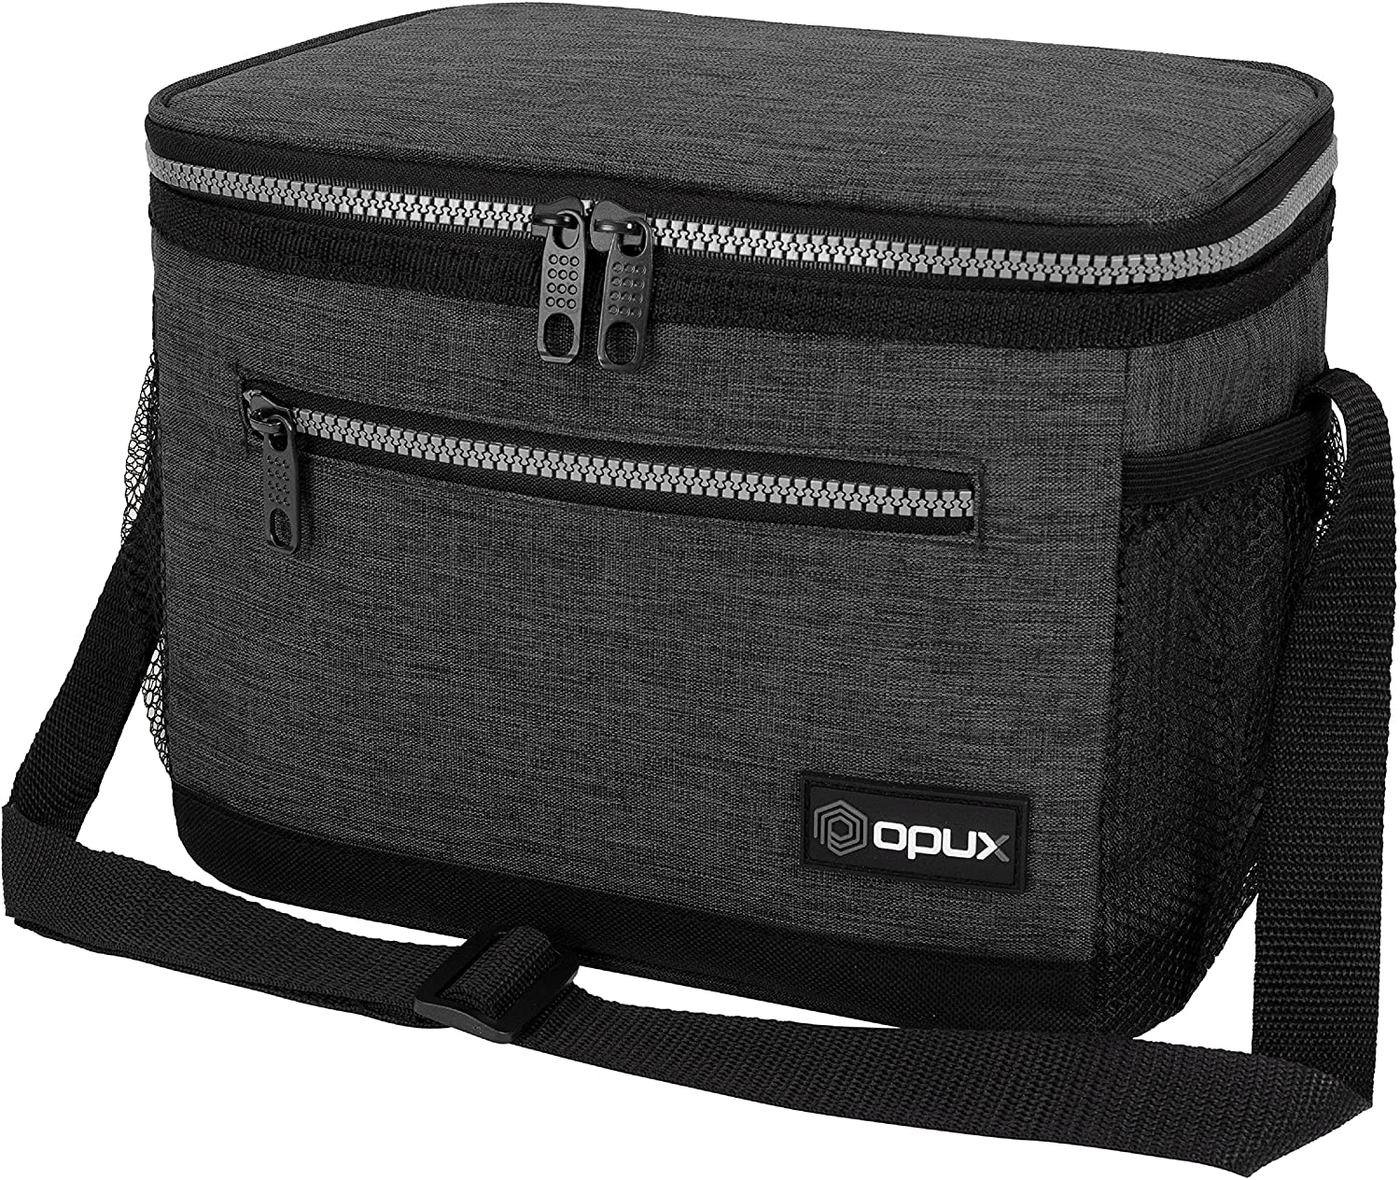 OPUX Insulated Lunch Box for Men Women, Leakproof Thermal Lunch Bag for Work, Reusable Lunch Cooler Tote, Soft School Lunch Pail for Kids with Shoulder Strap, Pockets, 14 Cans, 8L, Taupe Beige